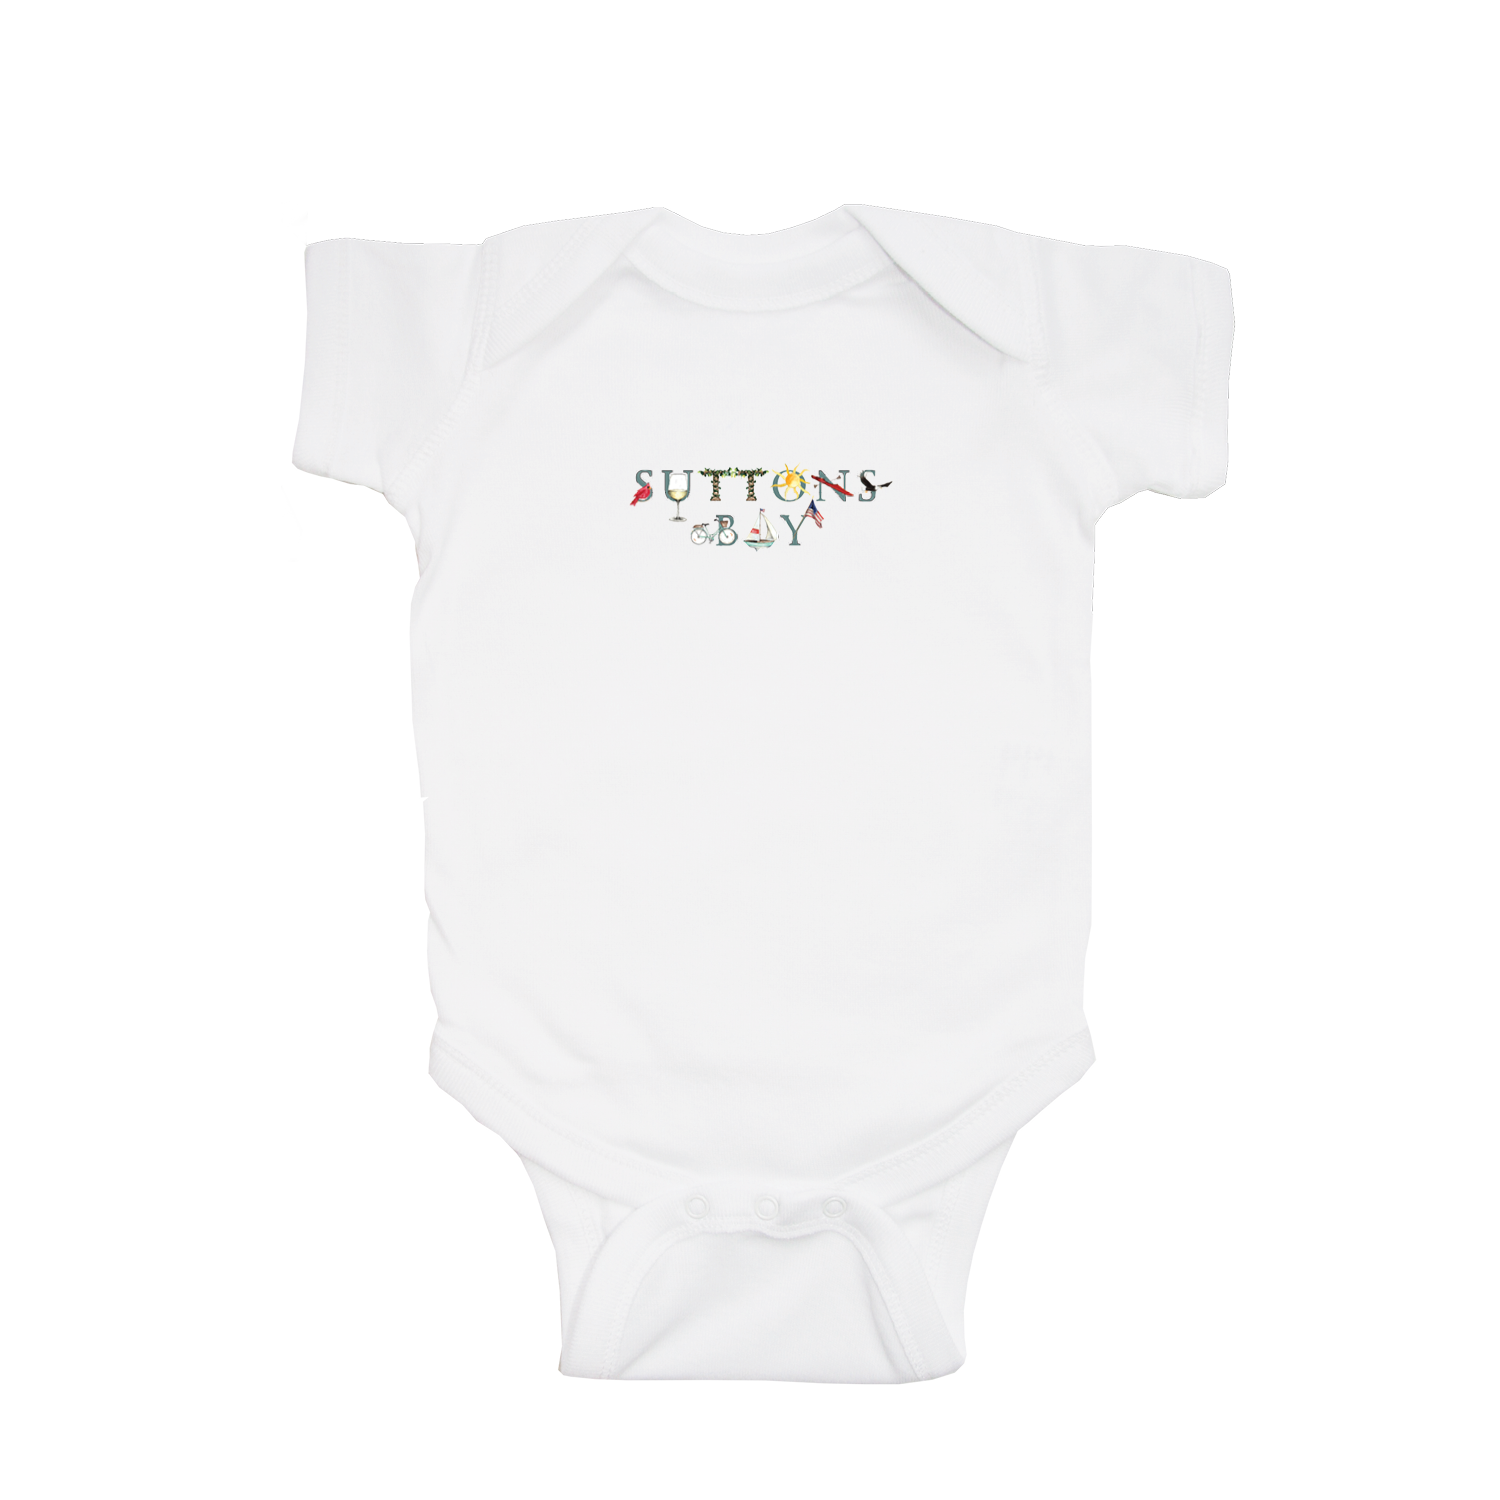 Suttons Bay baby snap up short sleeve